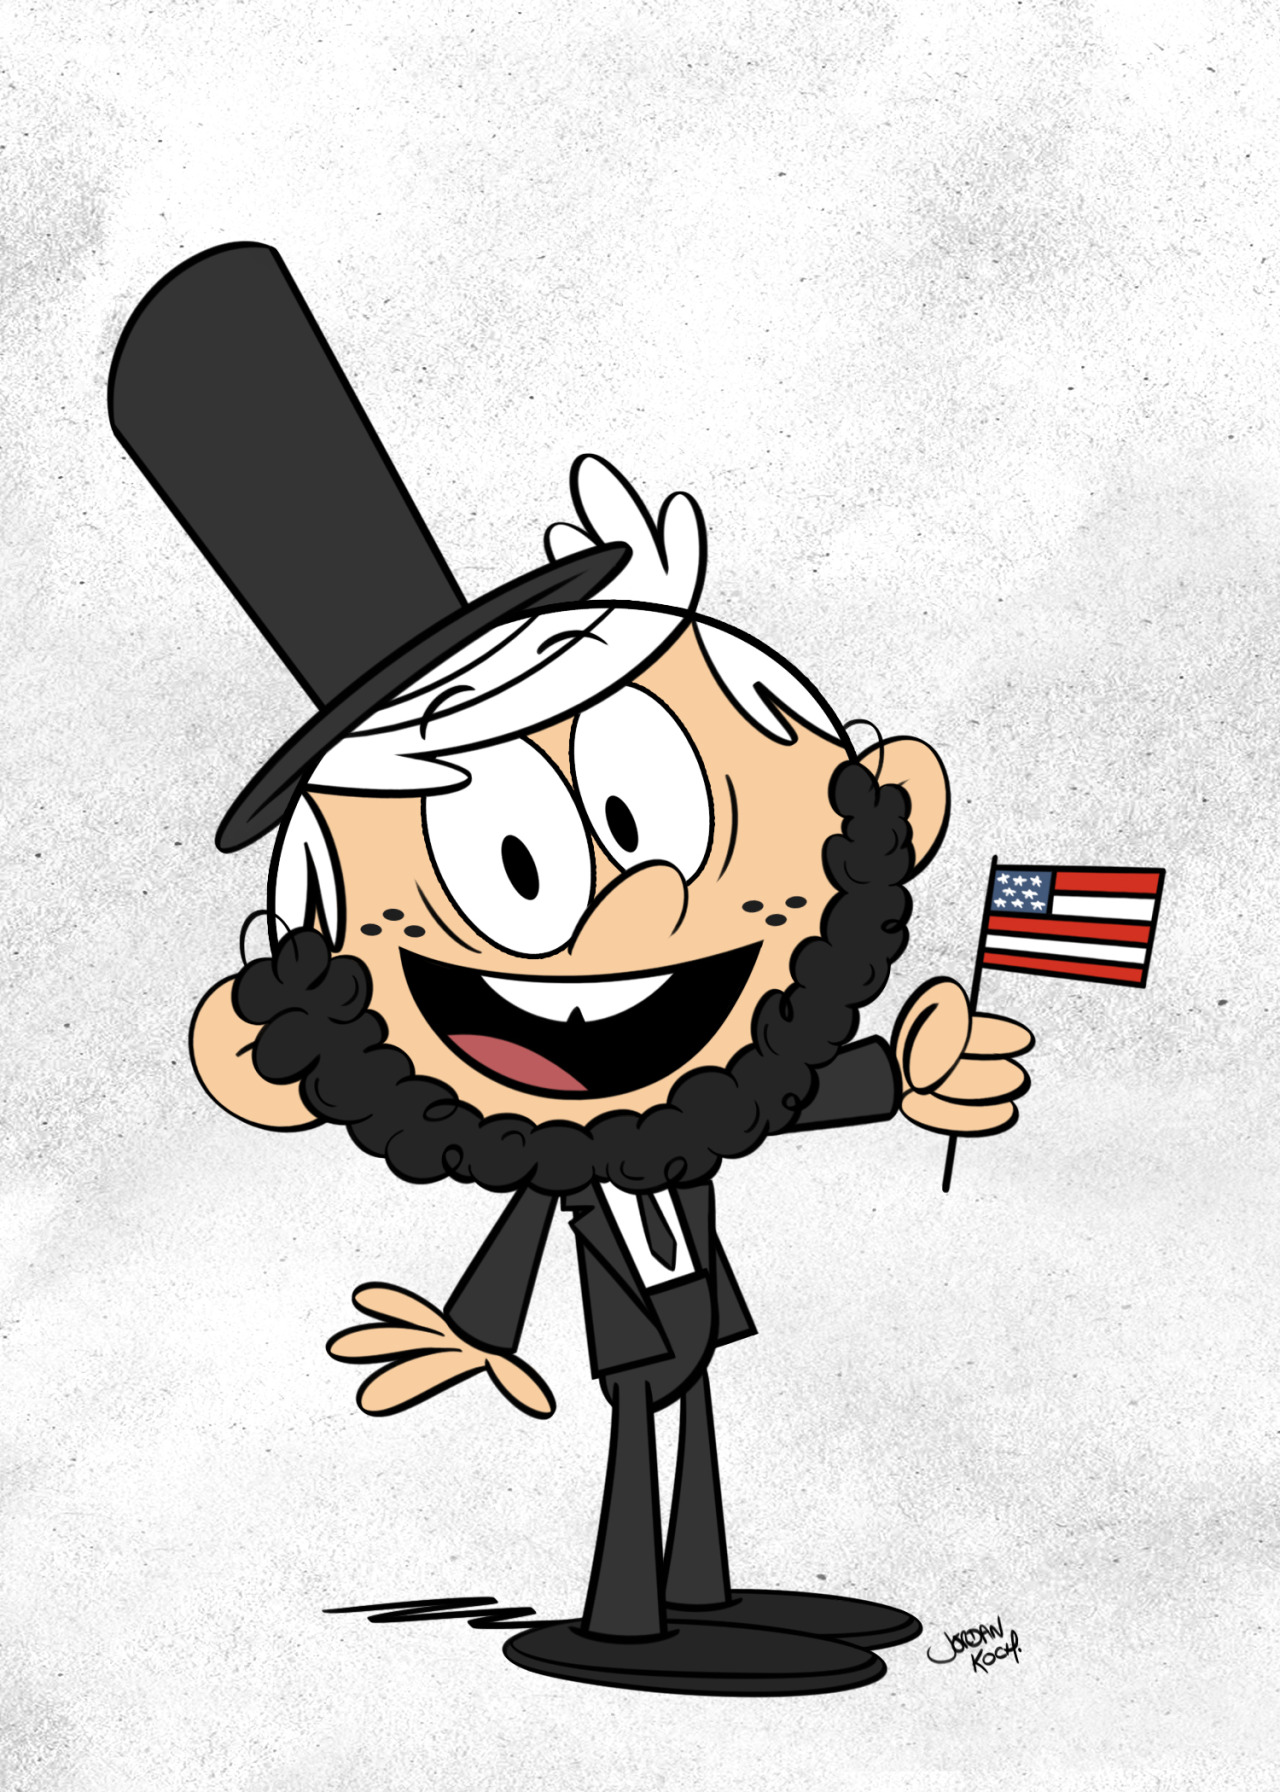 Abraham Lincoln Character Art from Code Name: S.T.E.A.M. #art #artwork  #gaming #videogames #gamer #gameart #ill… | Character art, Art gallery,  Game character design